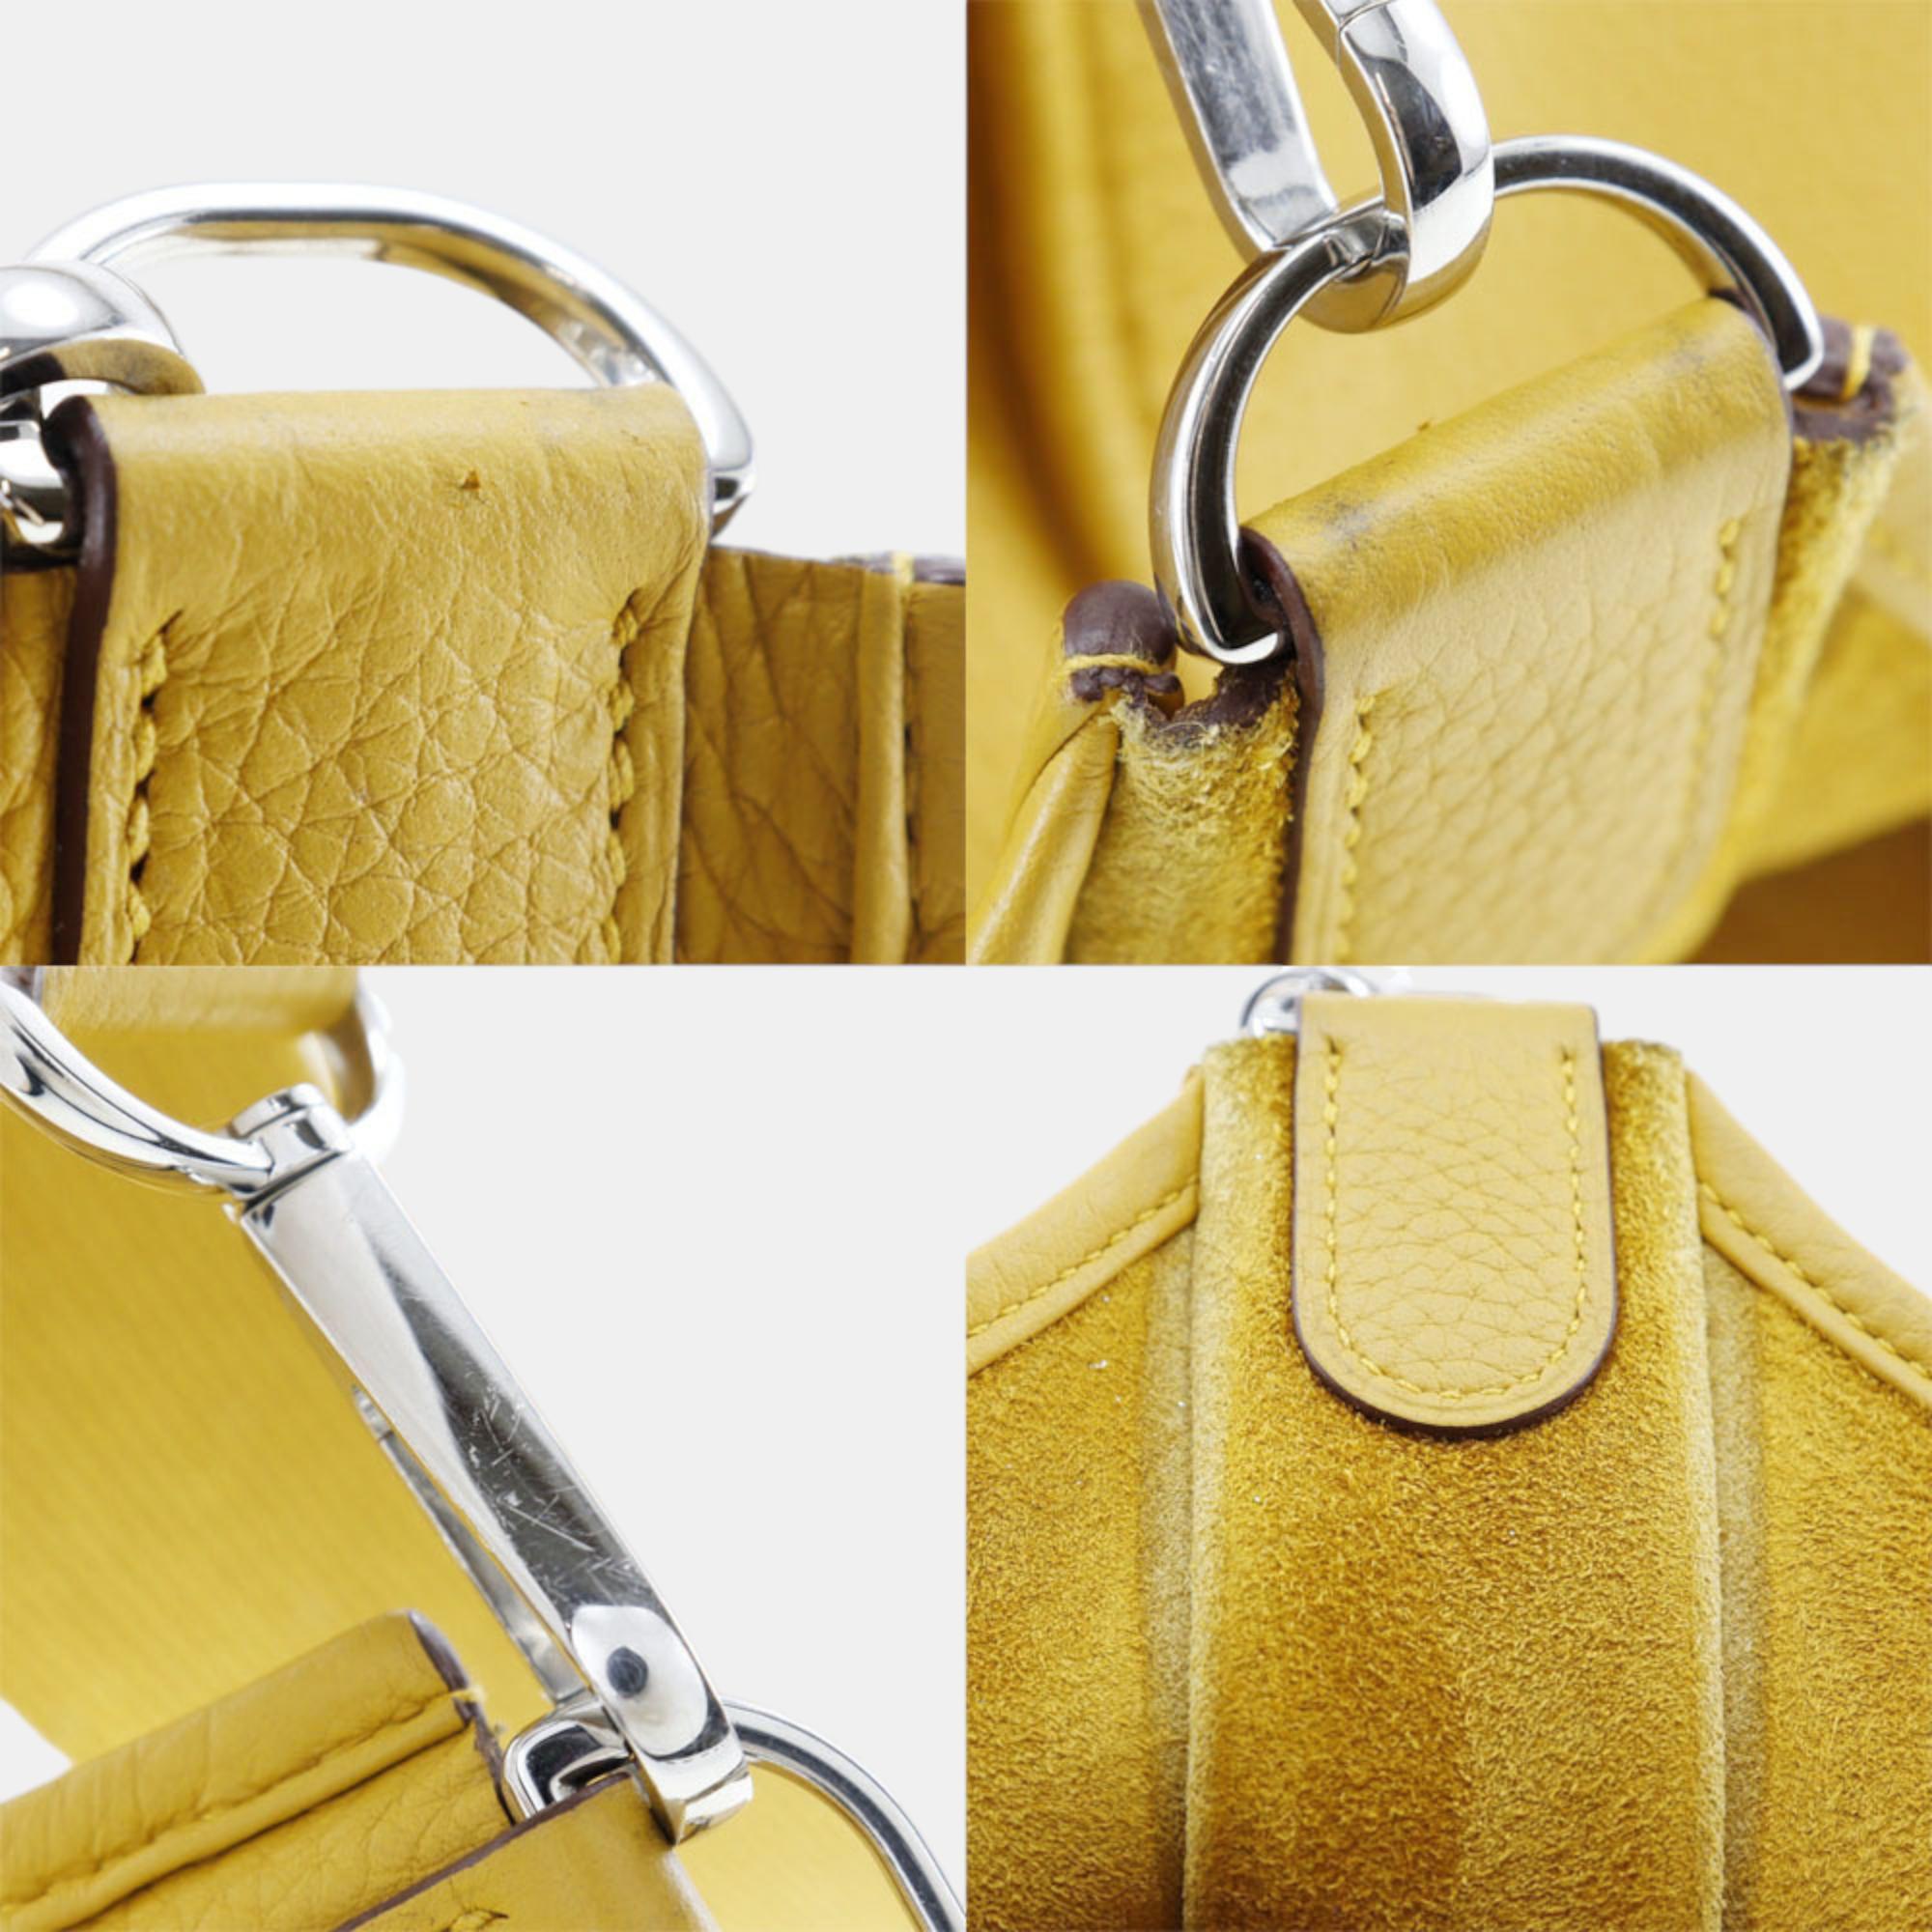 HERMES Evelyne 3PM Shoulder Bag Taurillon Clemence Jaune Ambre Made In France 2018 Yellow/Silver Hardware C Crossbody A5 Snap Button Evelyne3PM Ladies